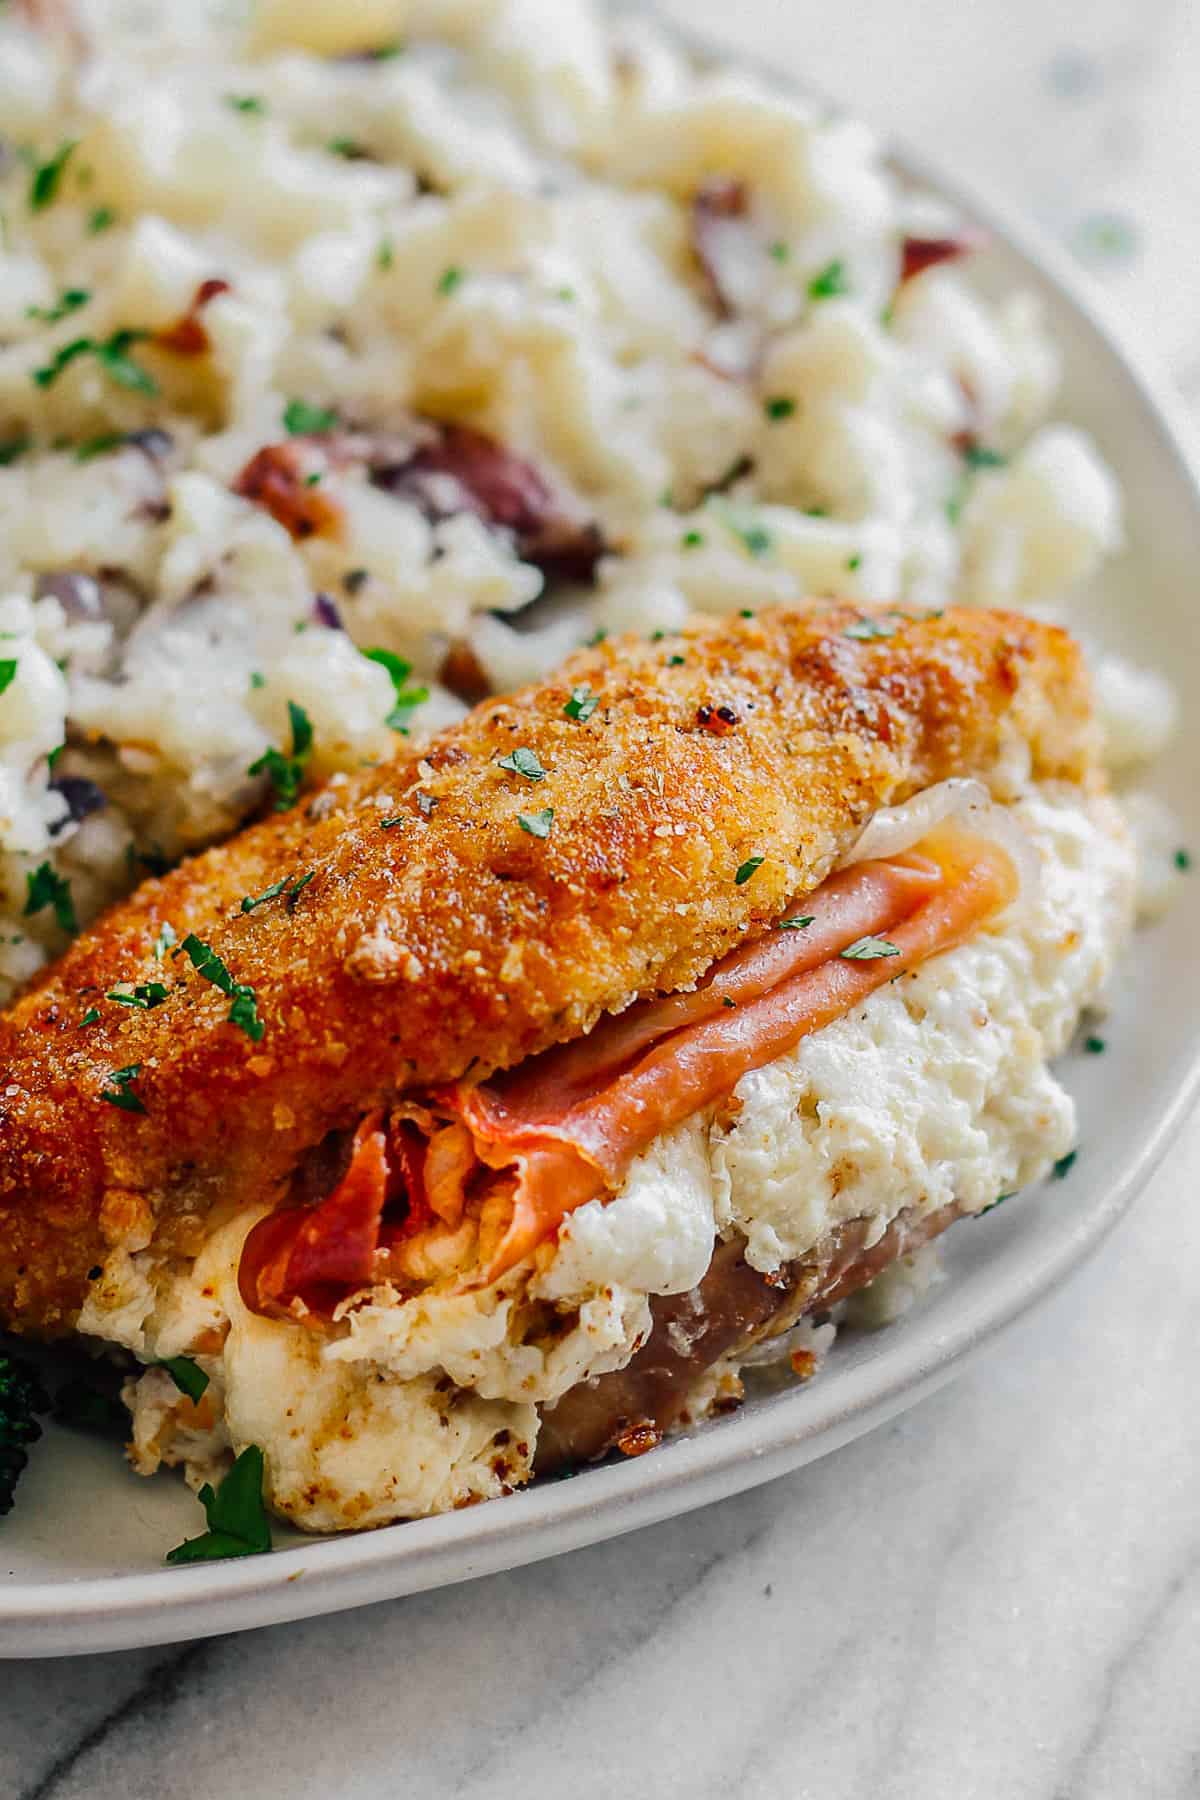 up close image of breaded chicken stuffed with prosciutto and cheese